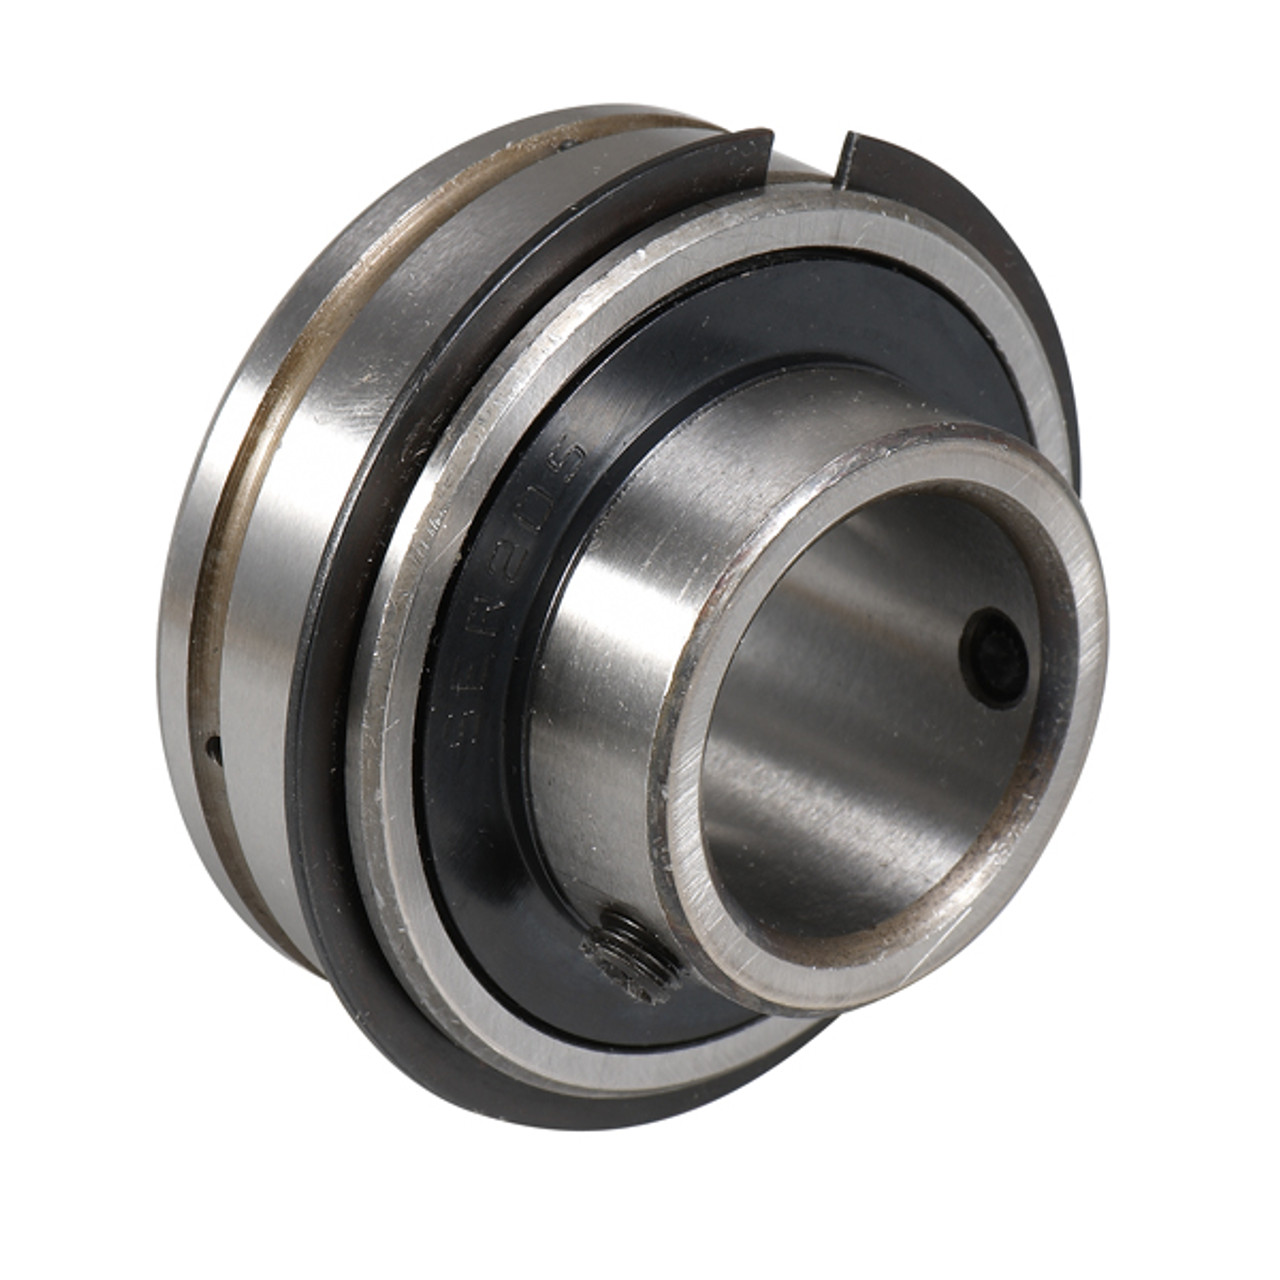 SER204-12 GENERIC 19.05mm Normal duty bearing insert with a parallel outer race and grubscrew locking - Imperial Thumbnail